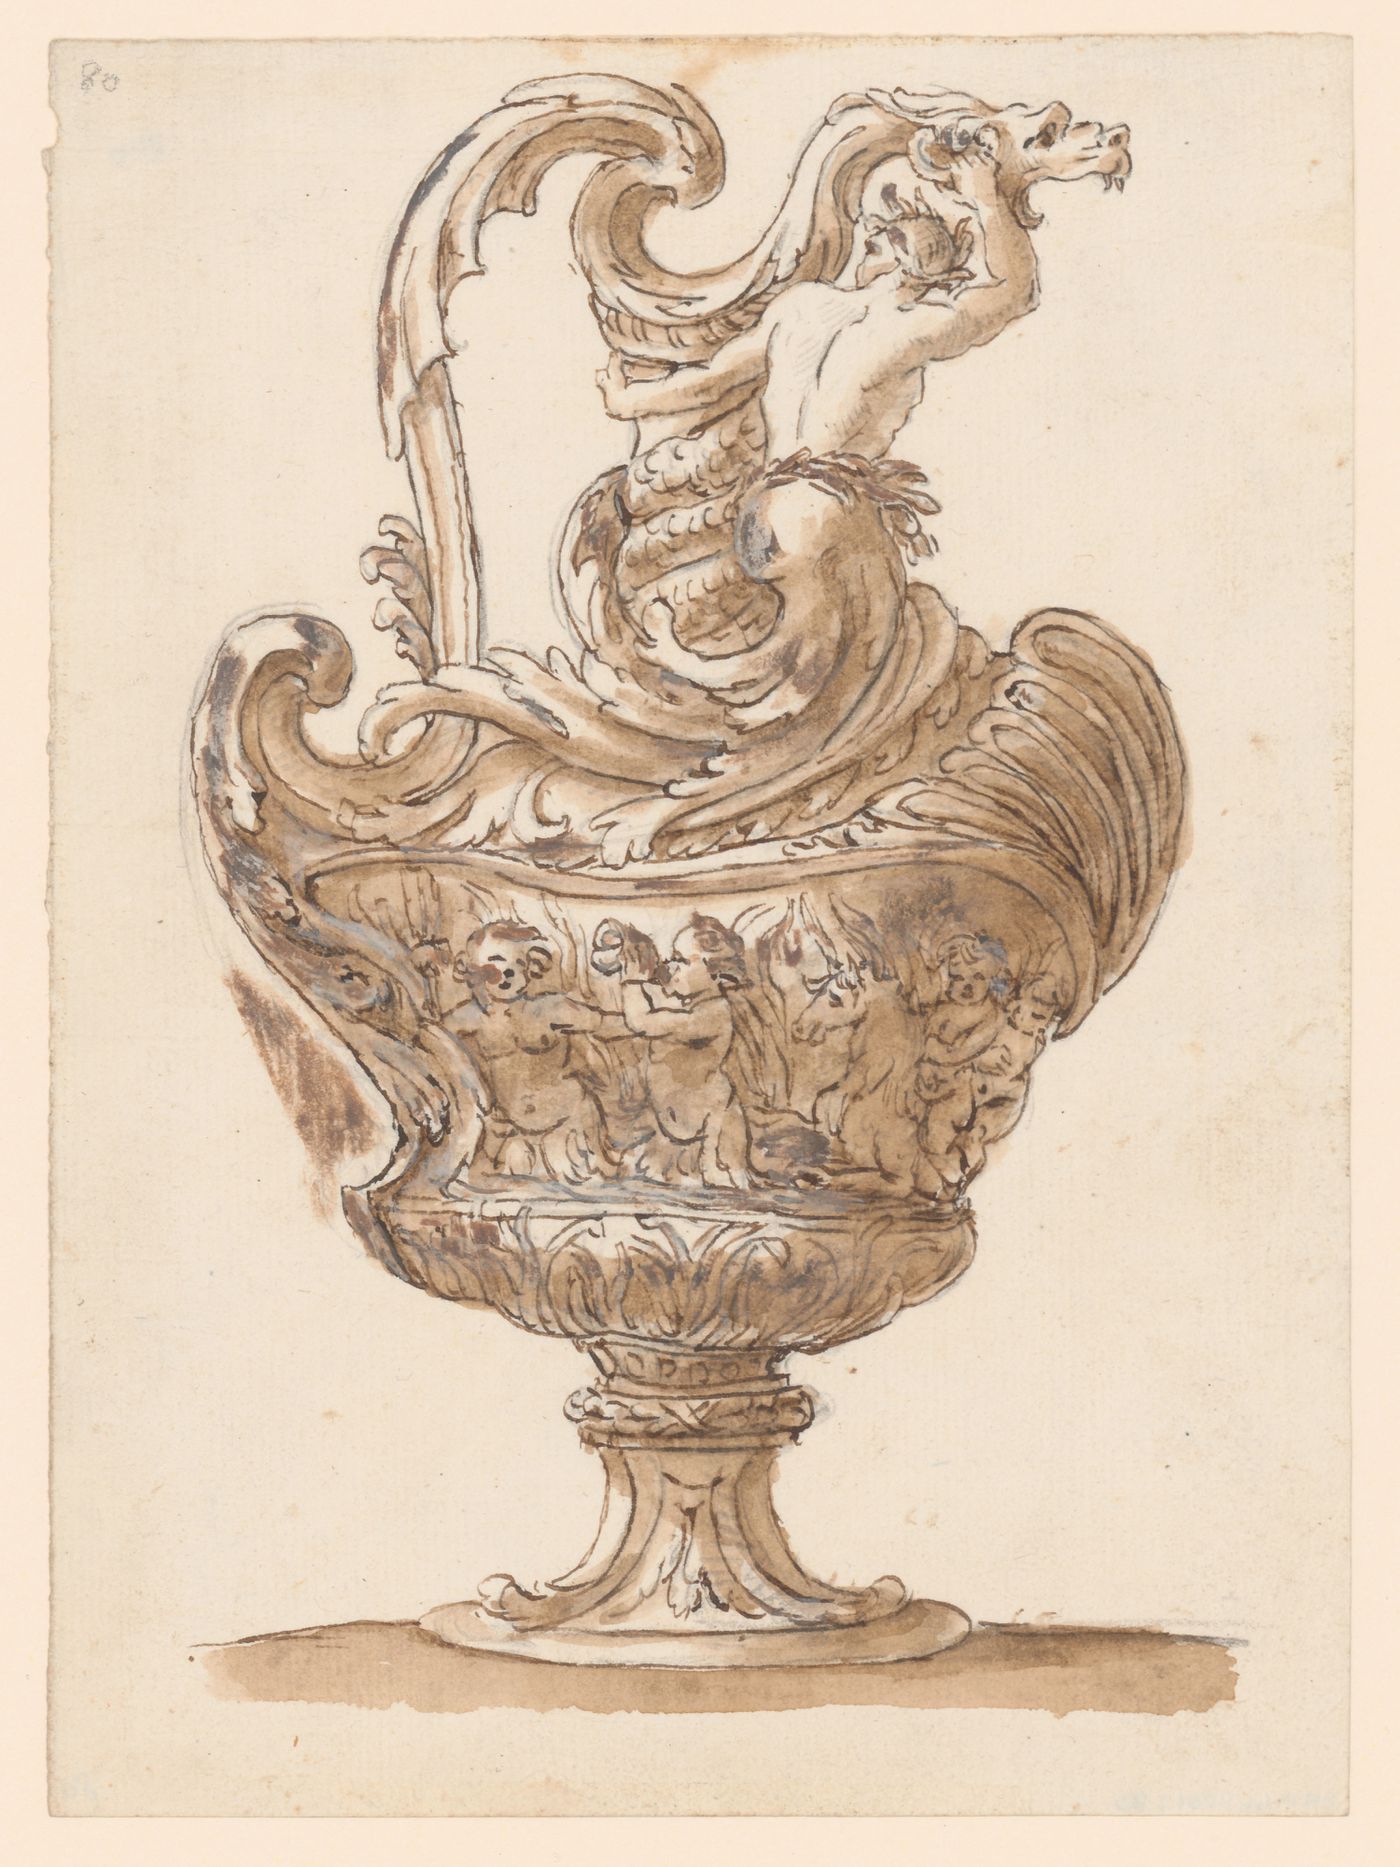 Drawing for an ornamental vase with a frieze of putti and a triton at the neck